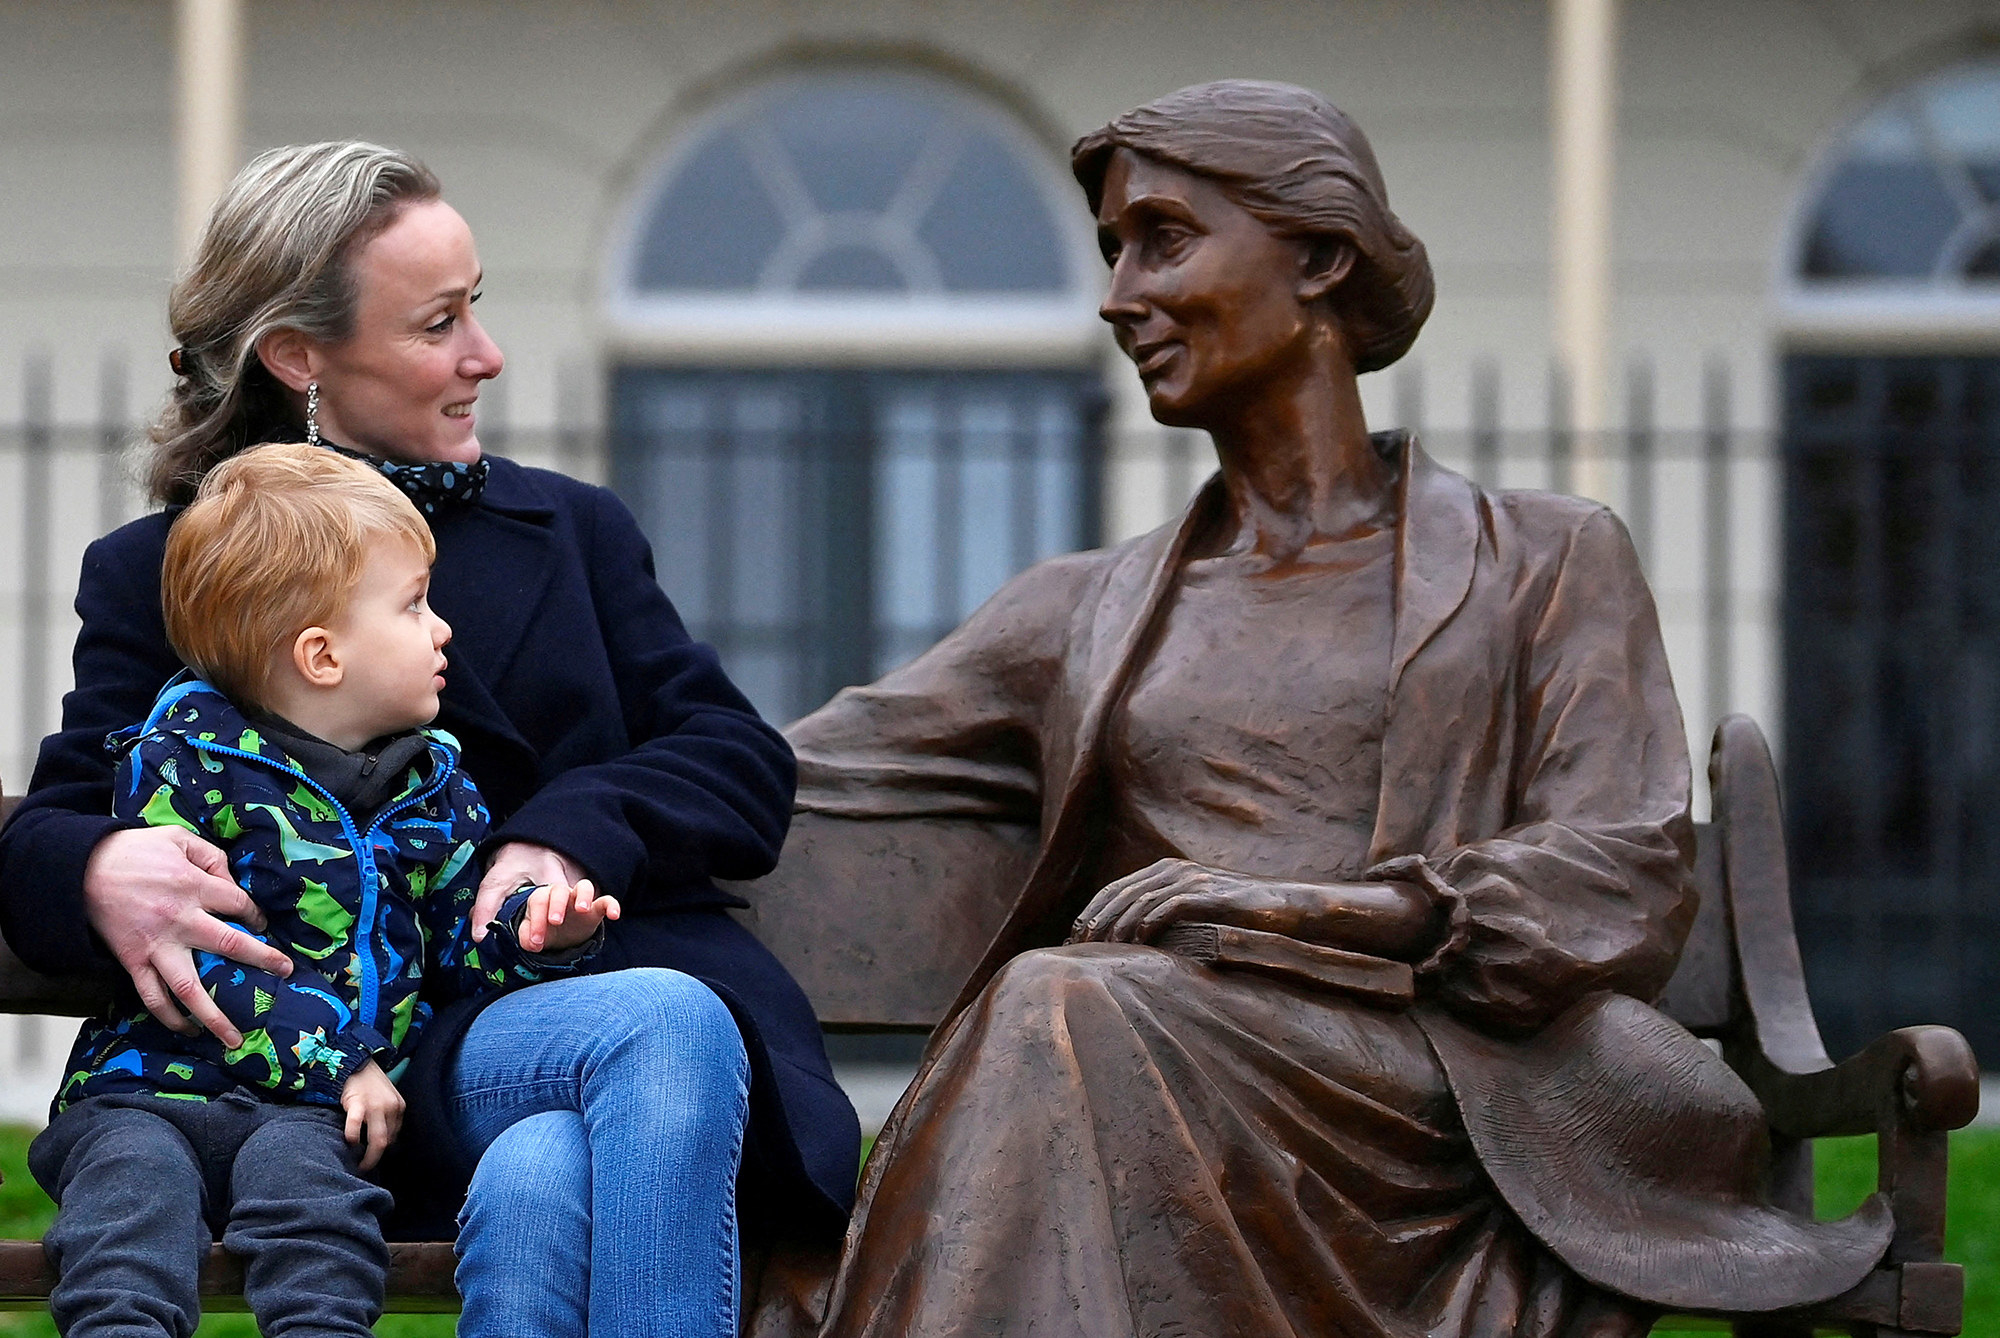 a woman and her young child sit on a bench looking warmly at a statue of a woman who is also sitting on the bench